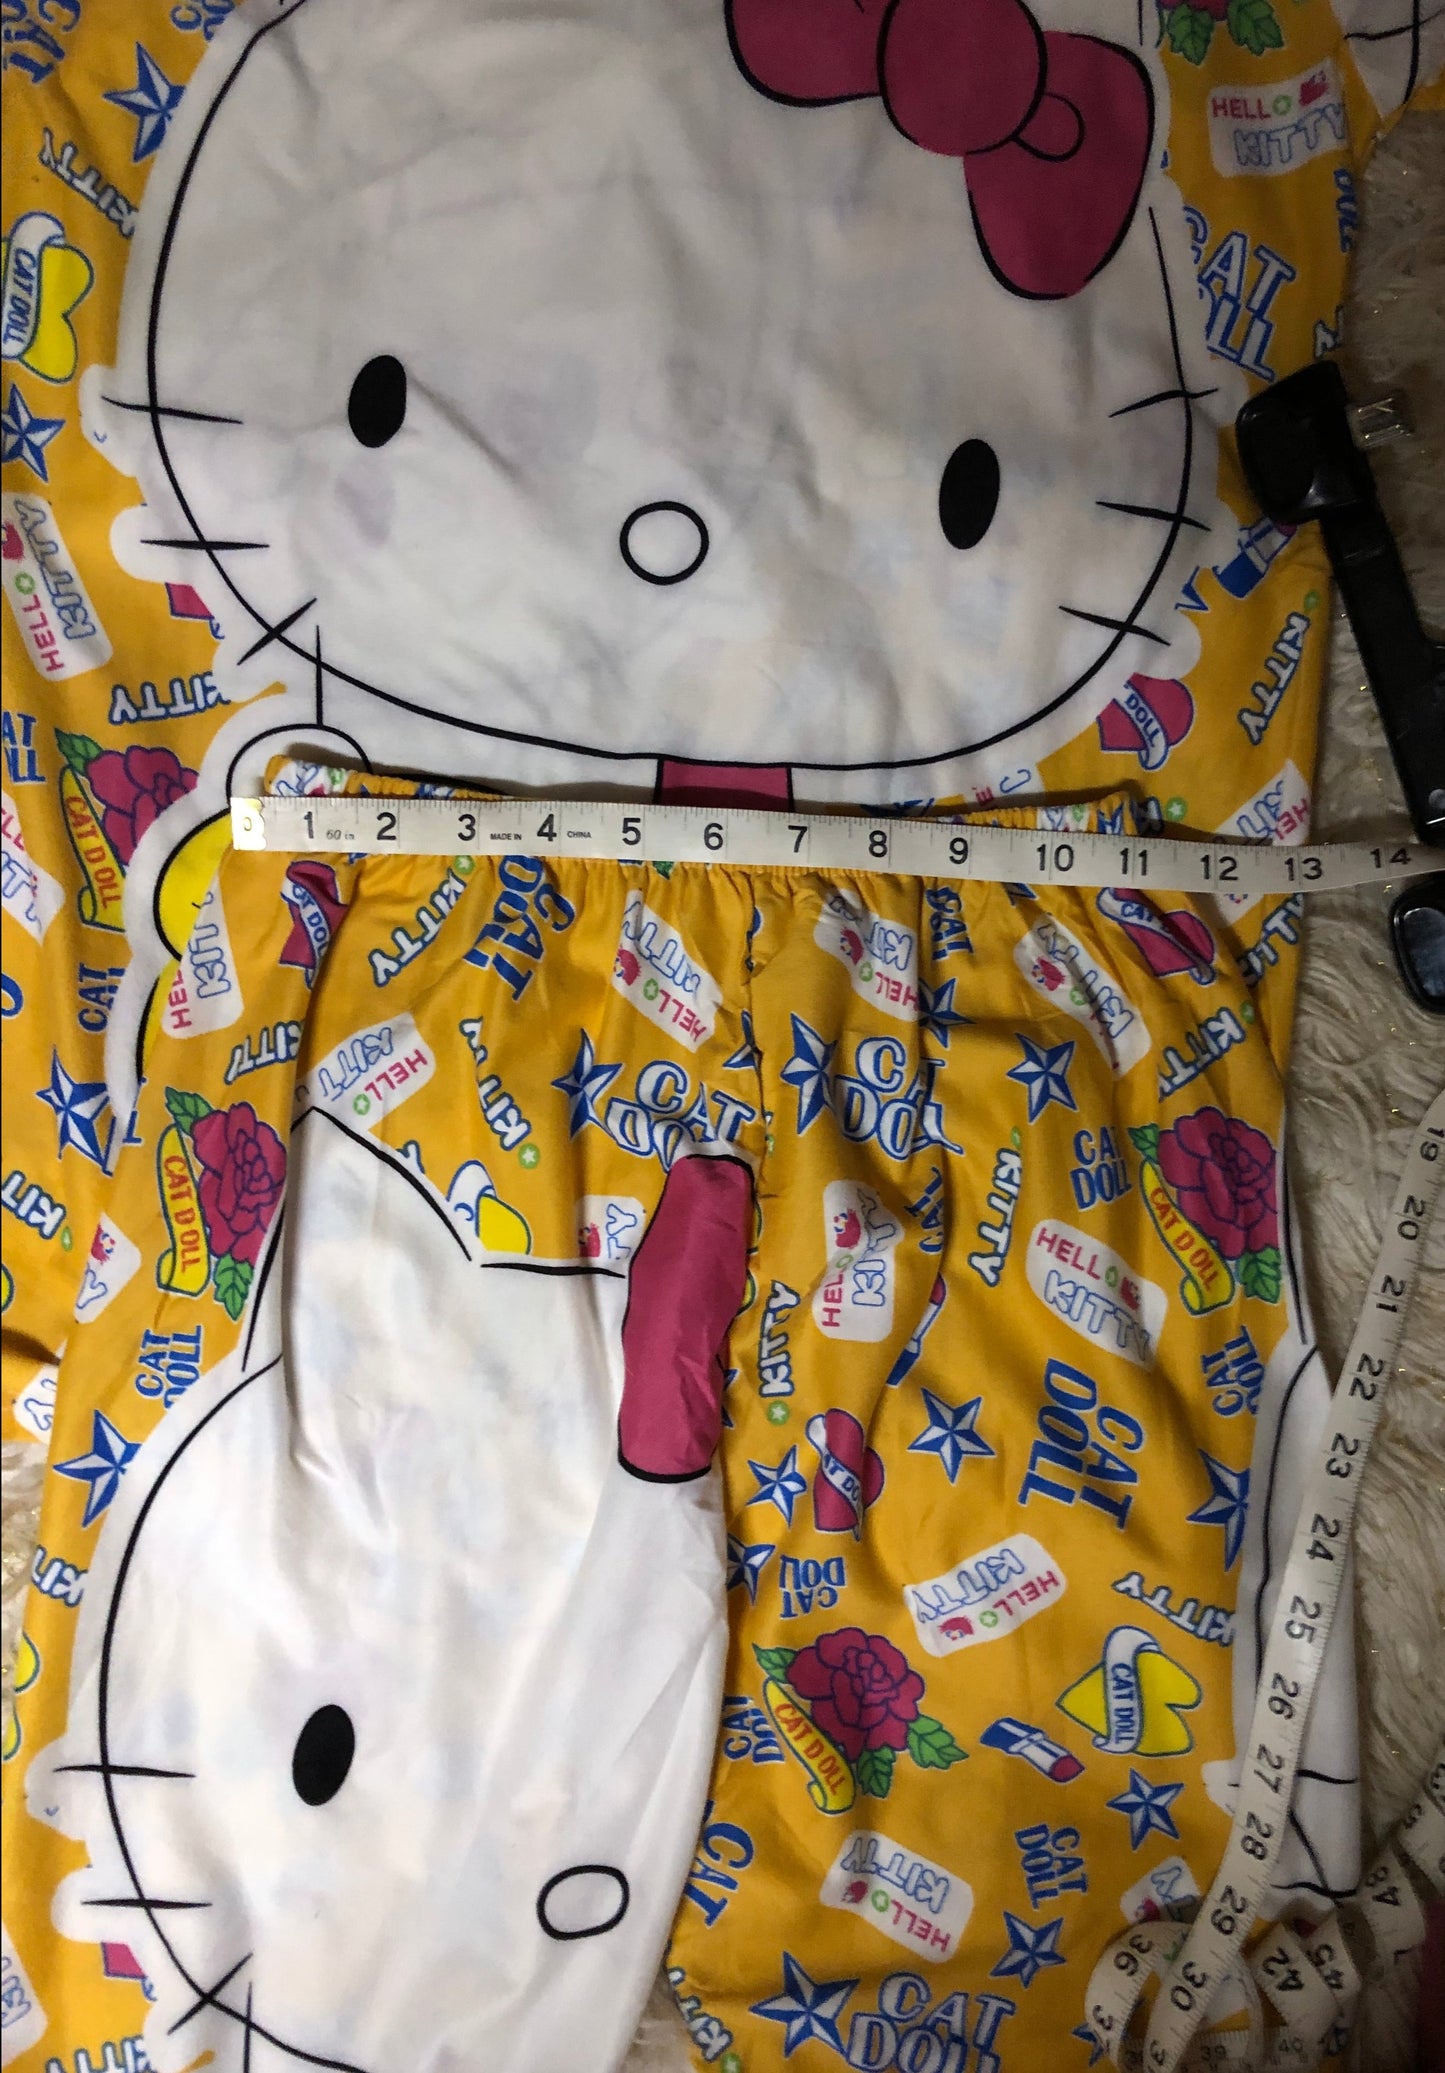 Girls 2 Pic.  Hello Kitty Set "New Arrival" Size Med/Large